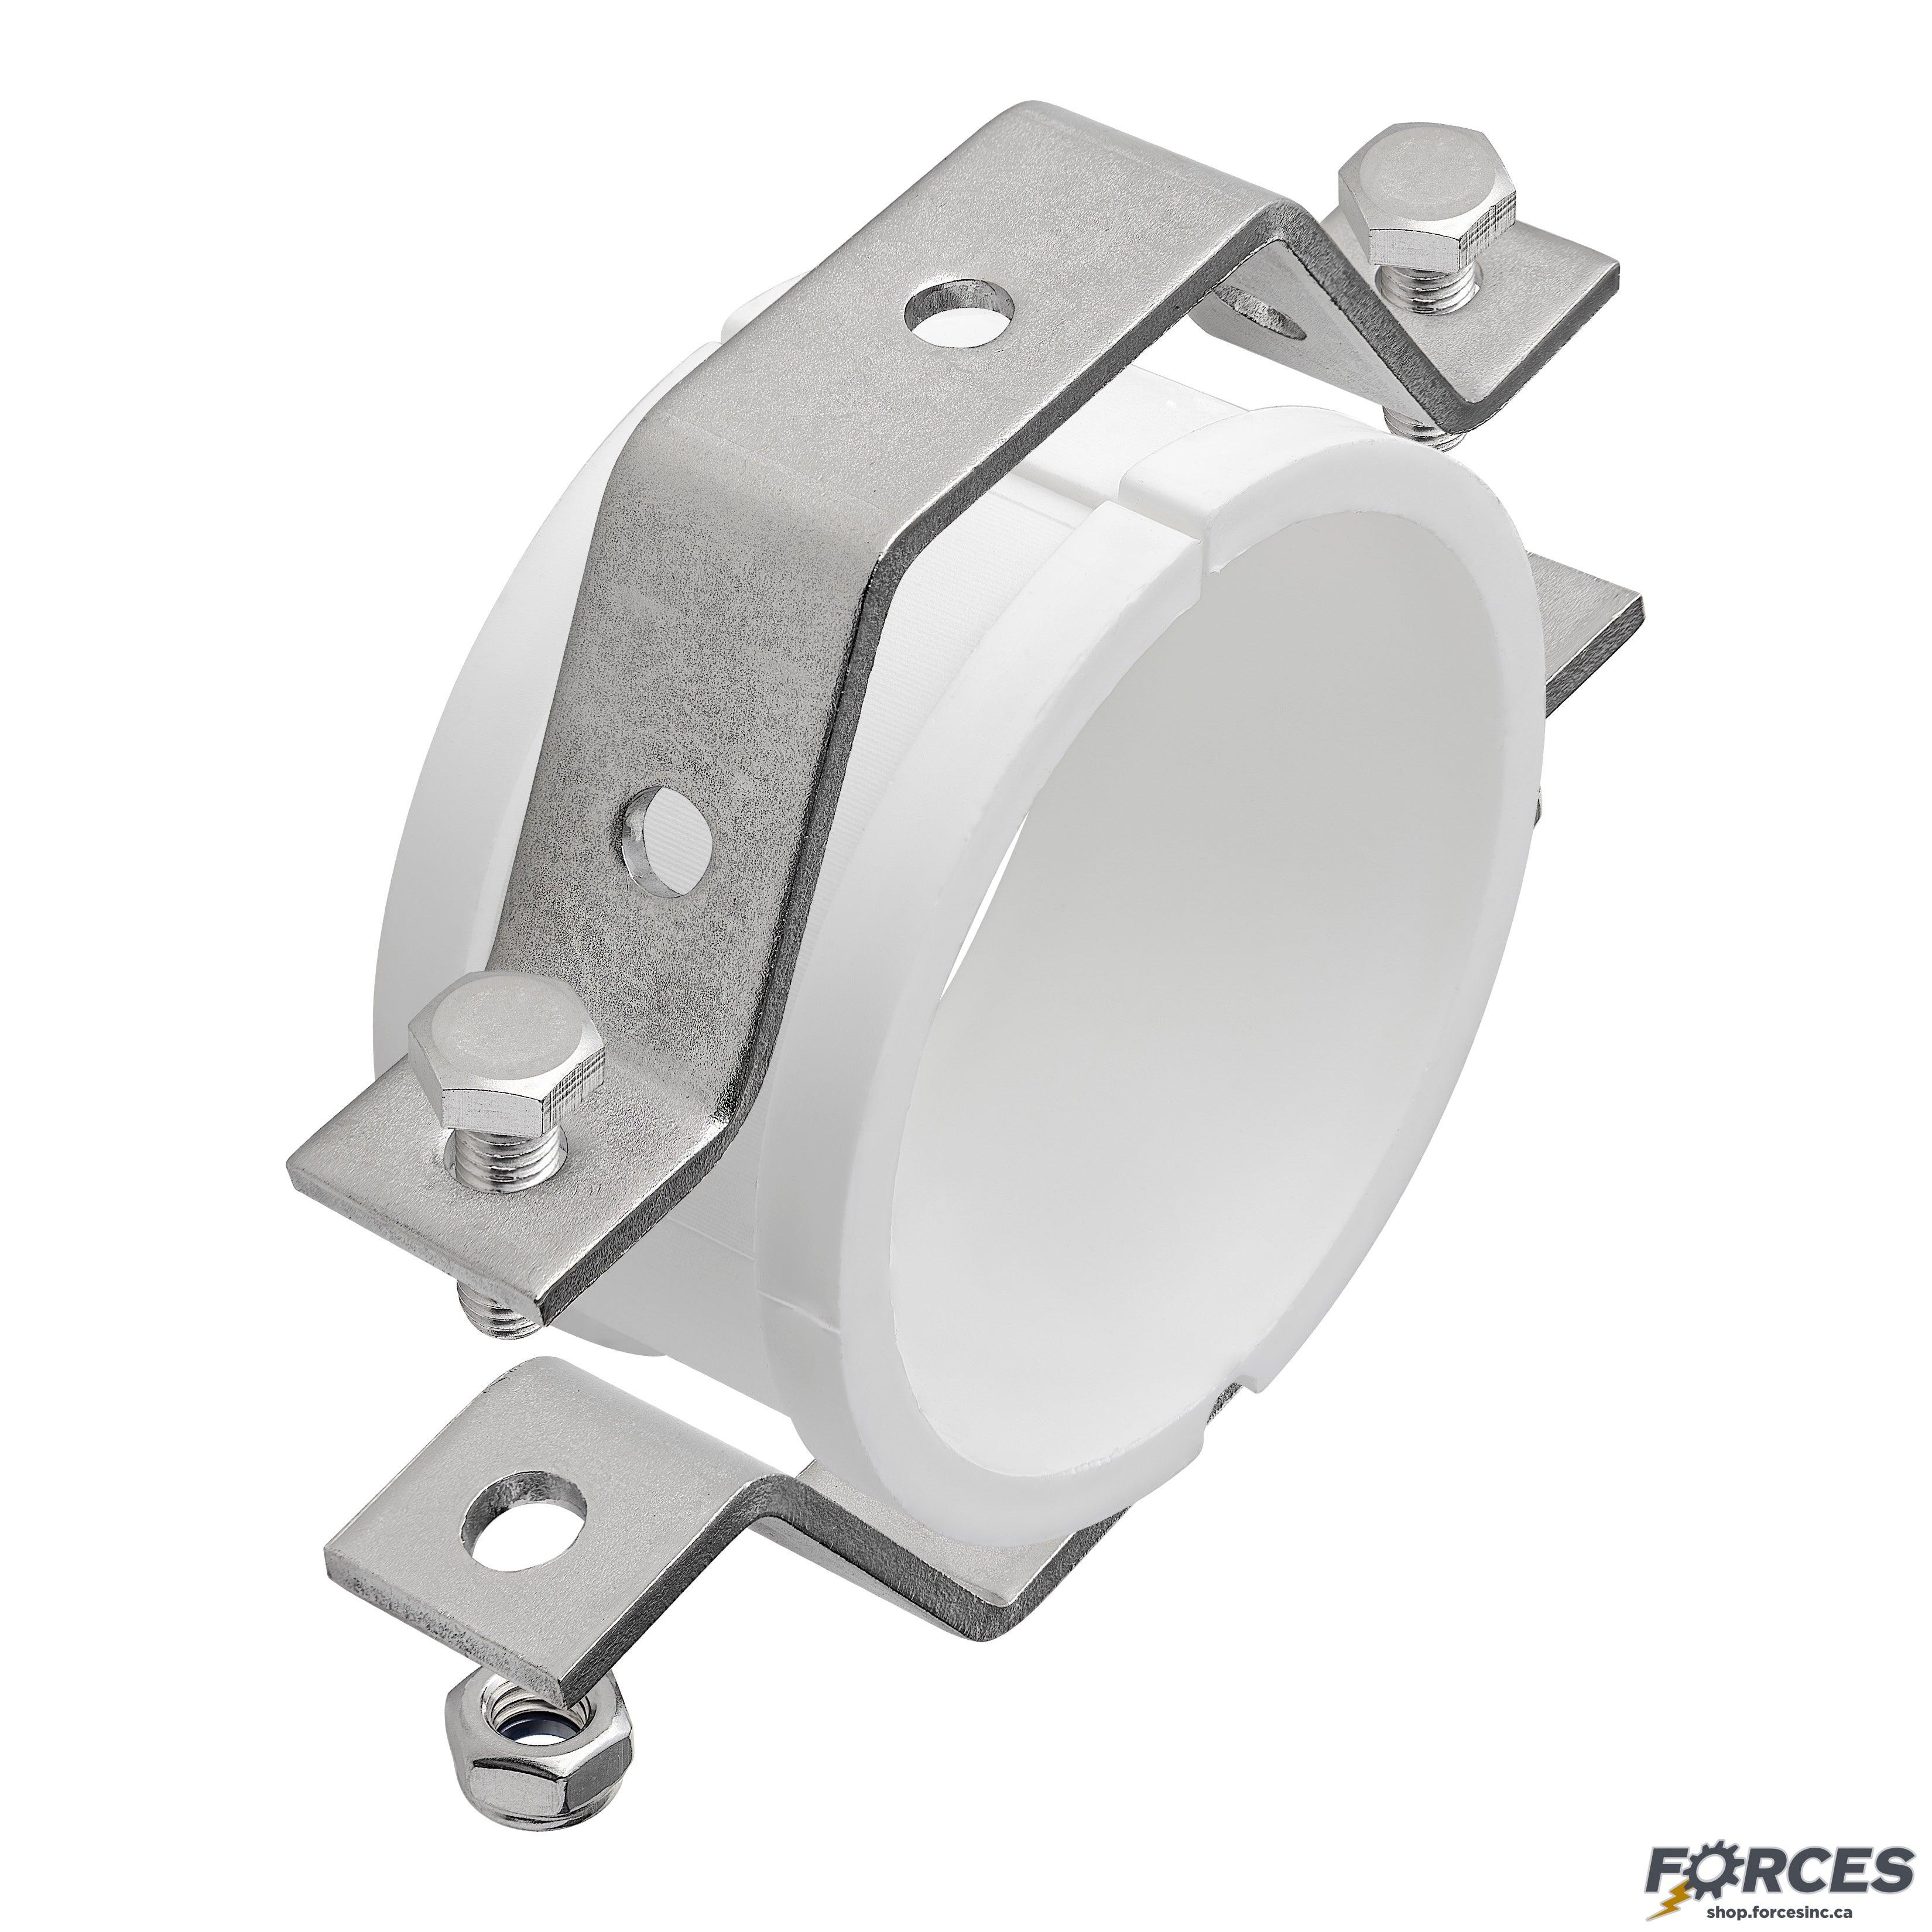 2" Hanger for Sanitary Tube With PVC Insert 304 Stainless Steel - Forces Inc